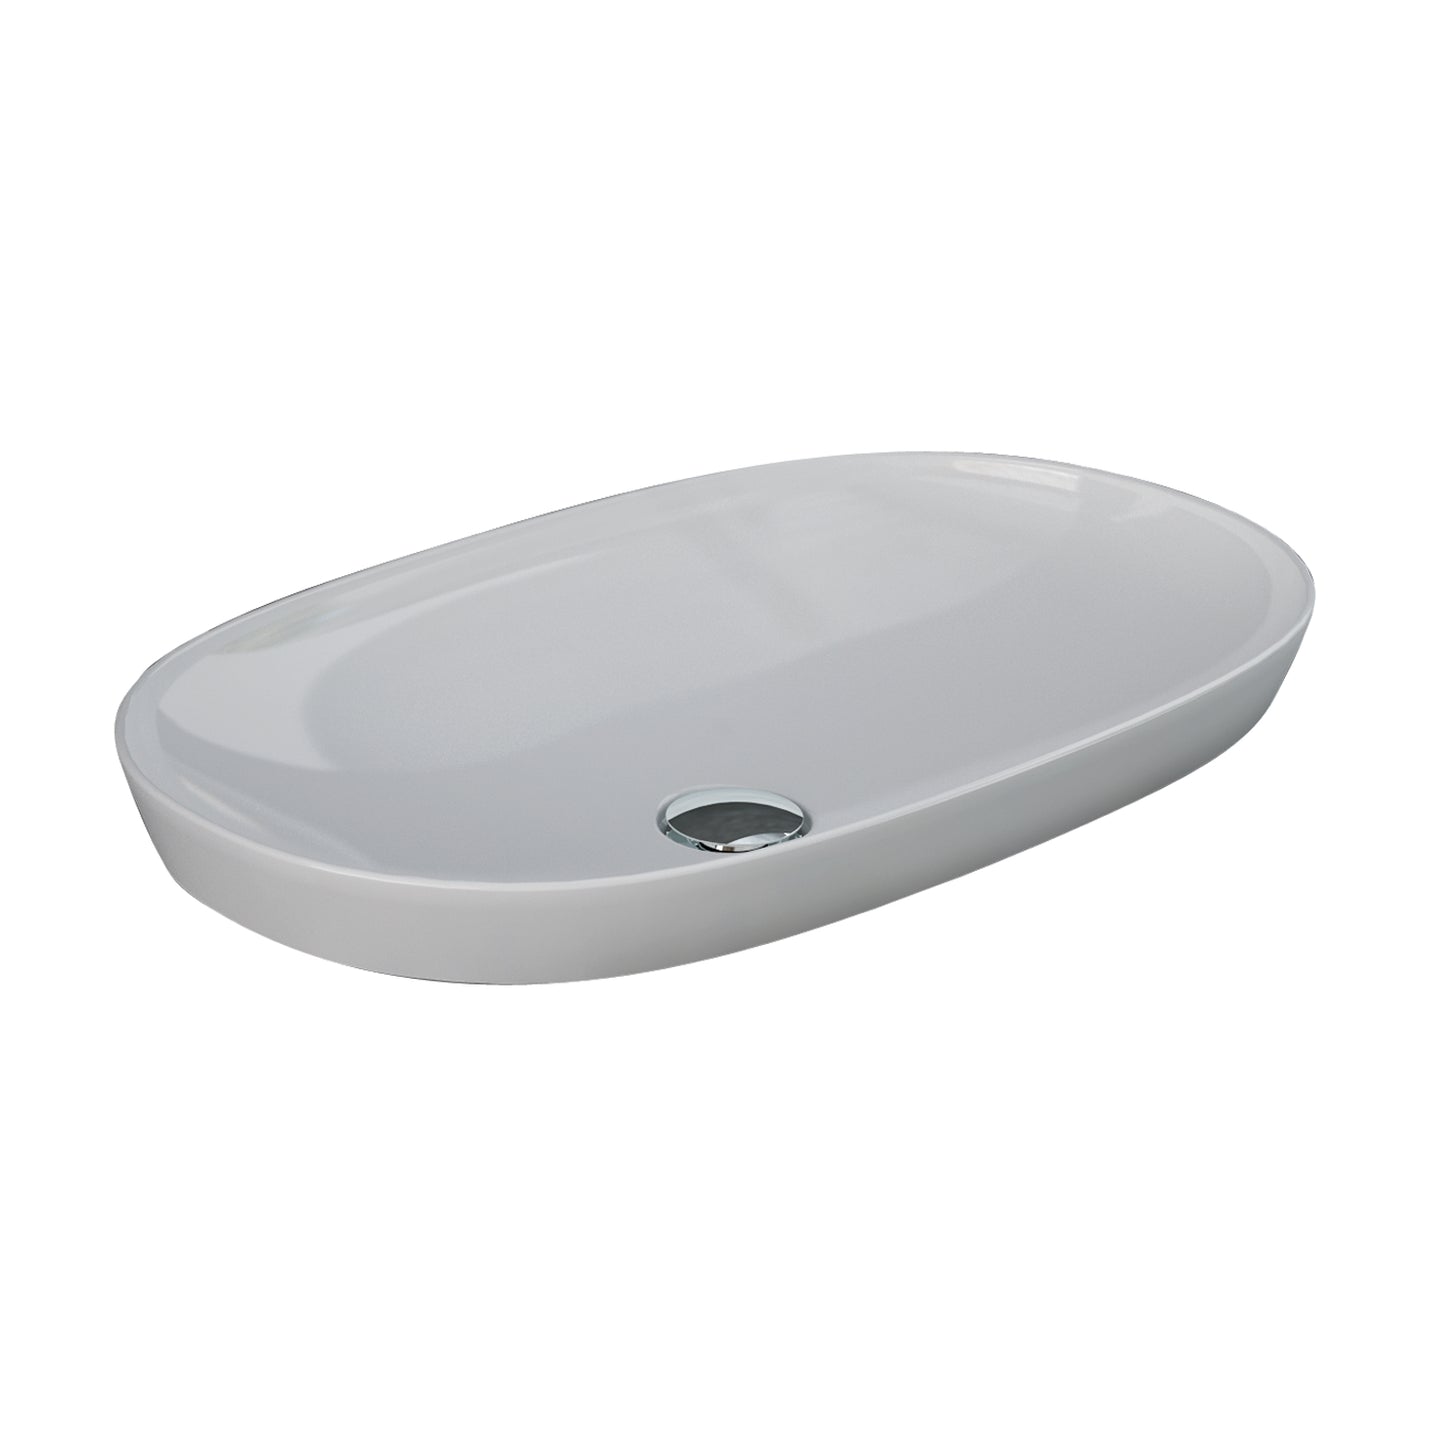 Variant 19 3/4" x 14" Oval Drop In Lavatory Sink in White